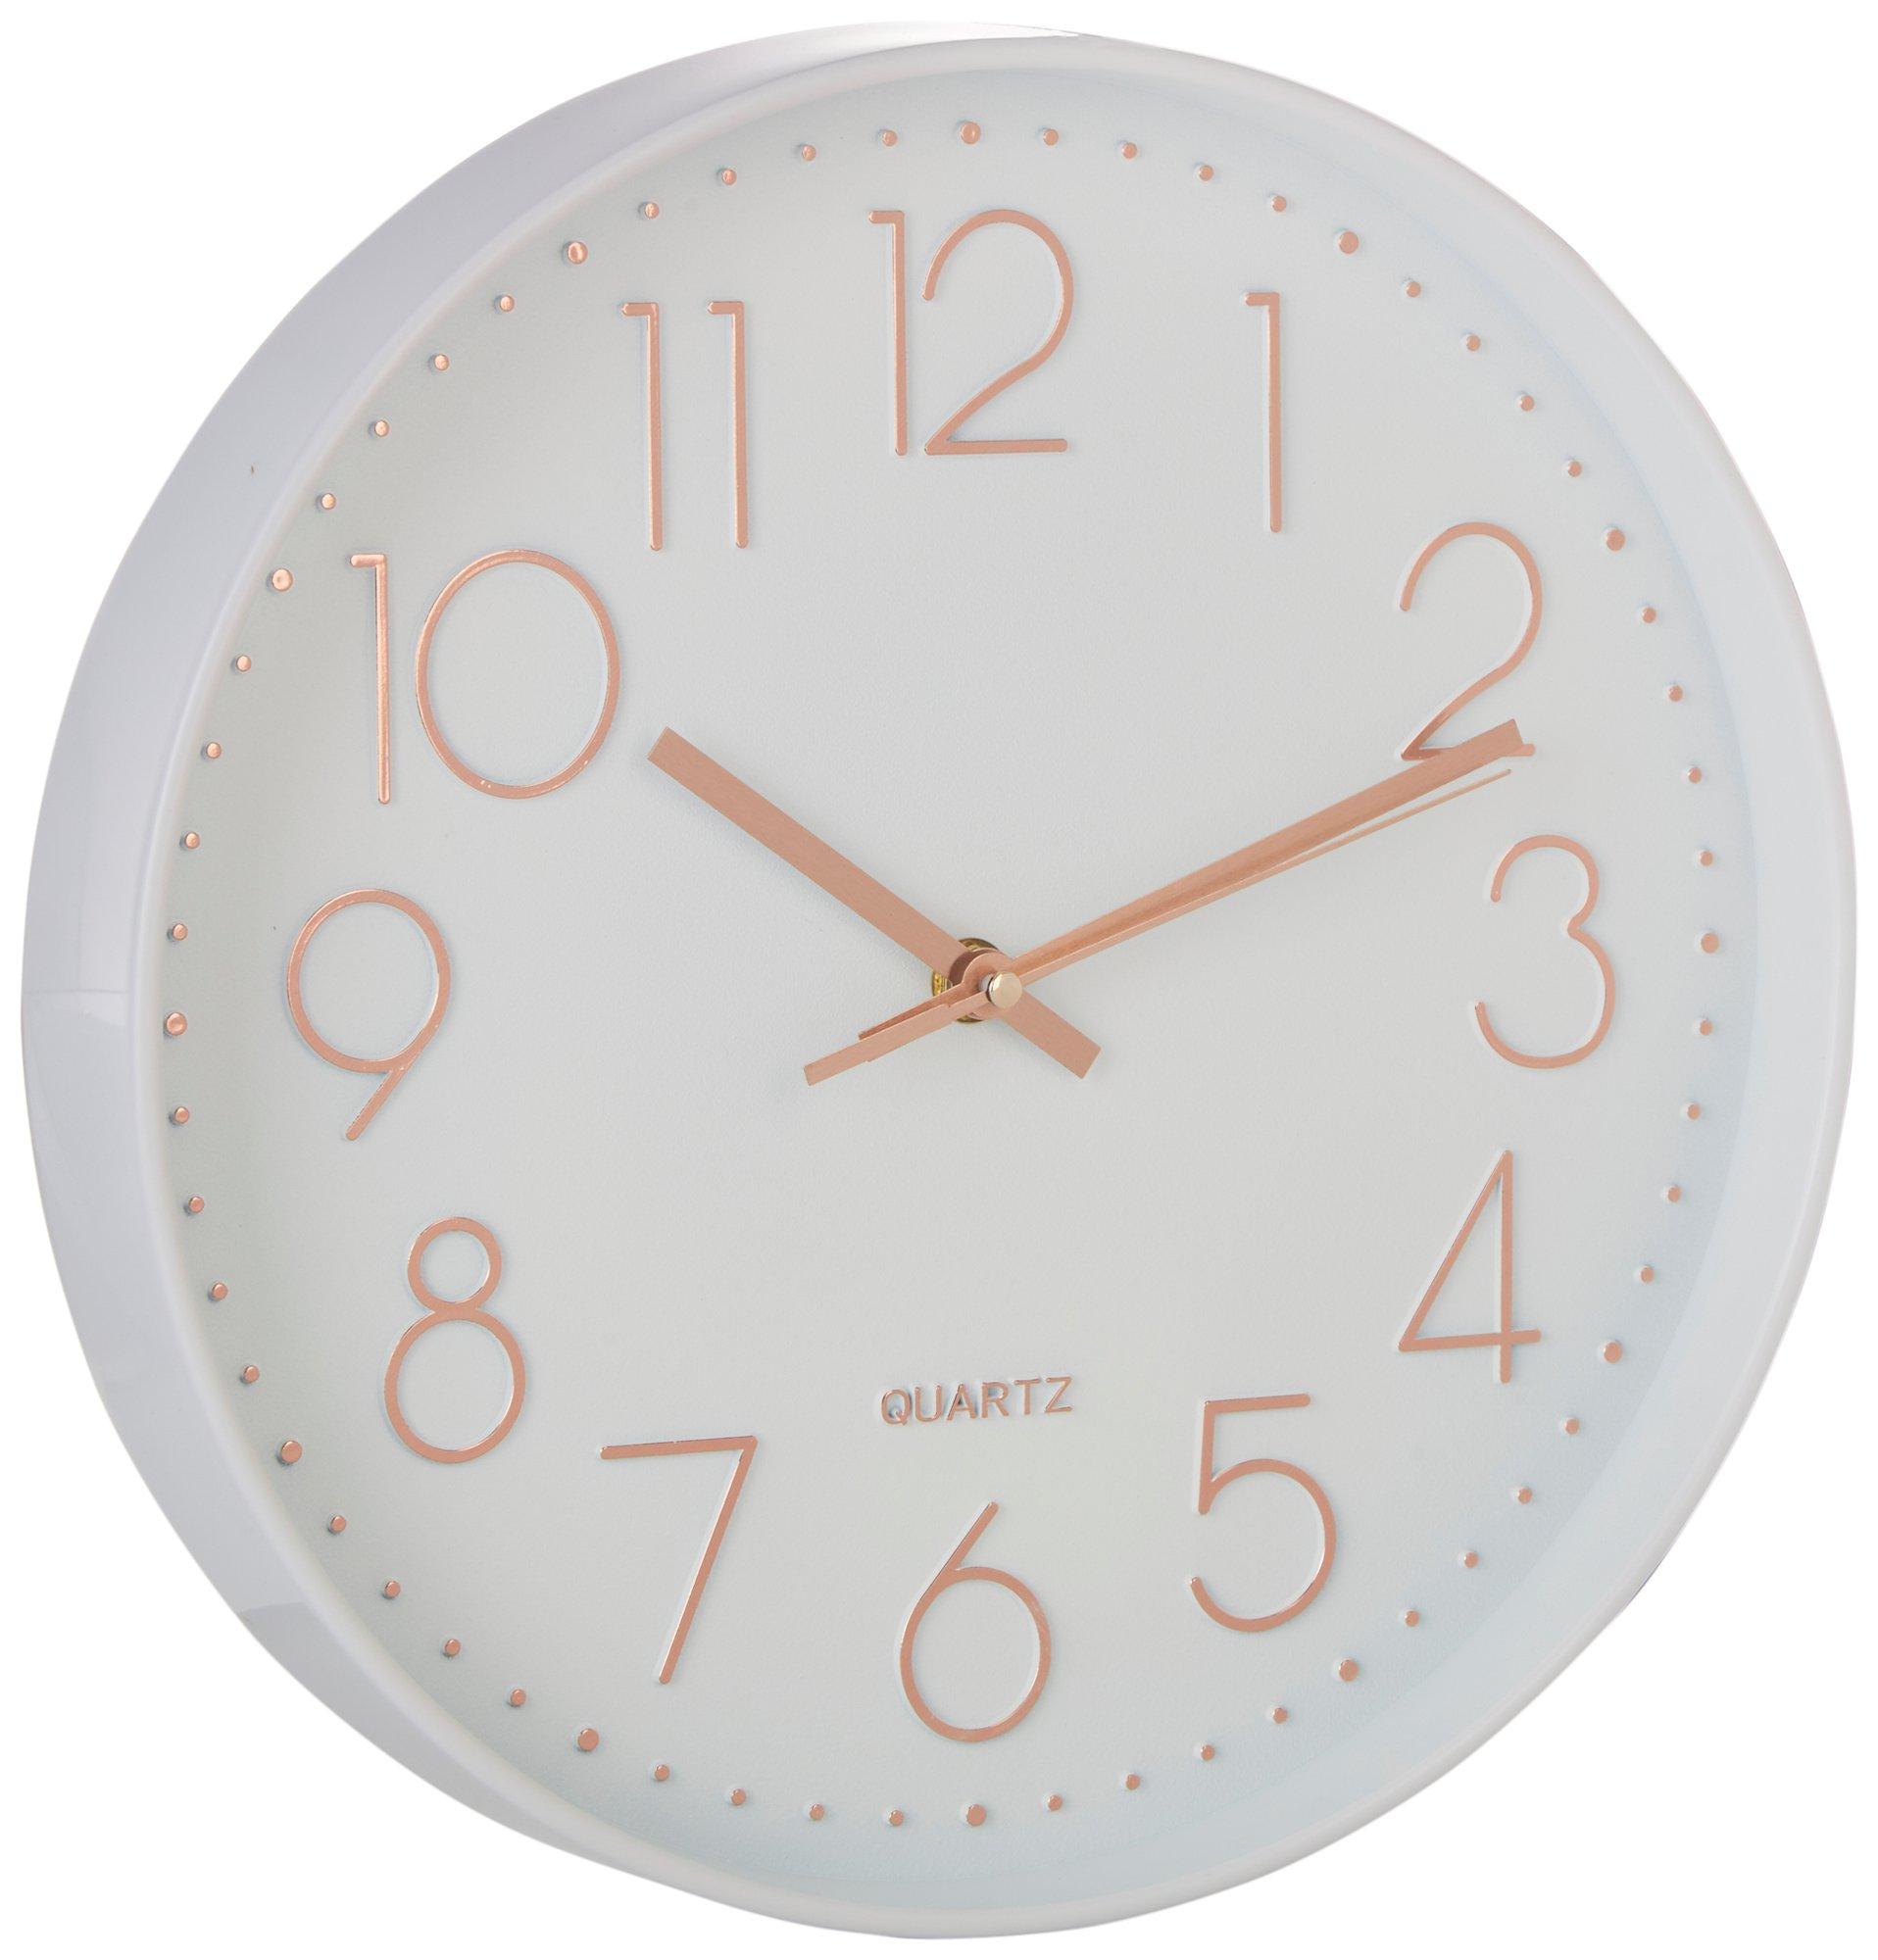 Deco Style Large Number Wall Clock